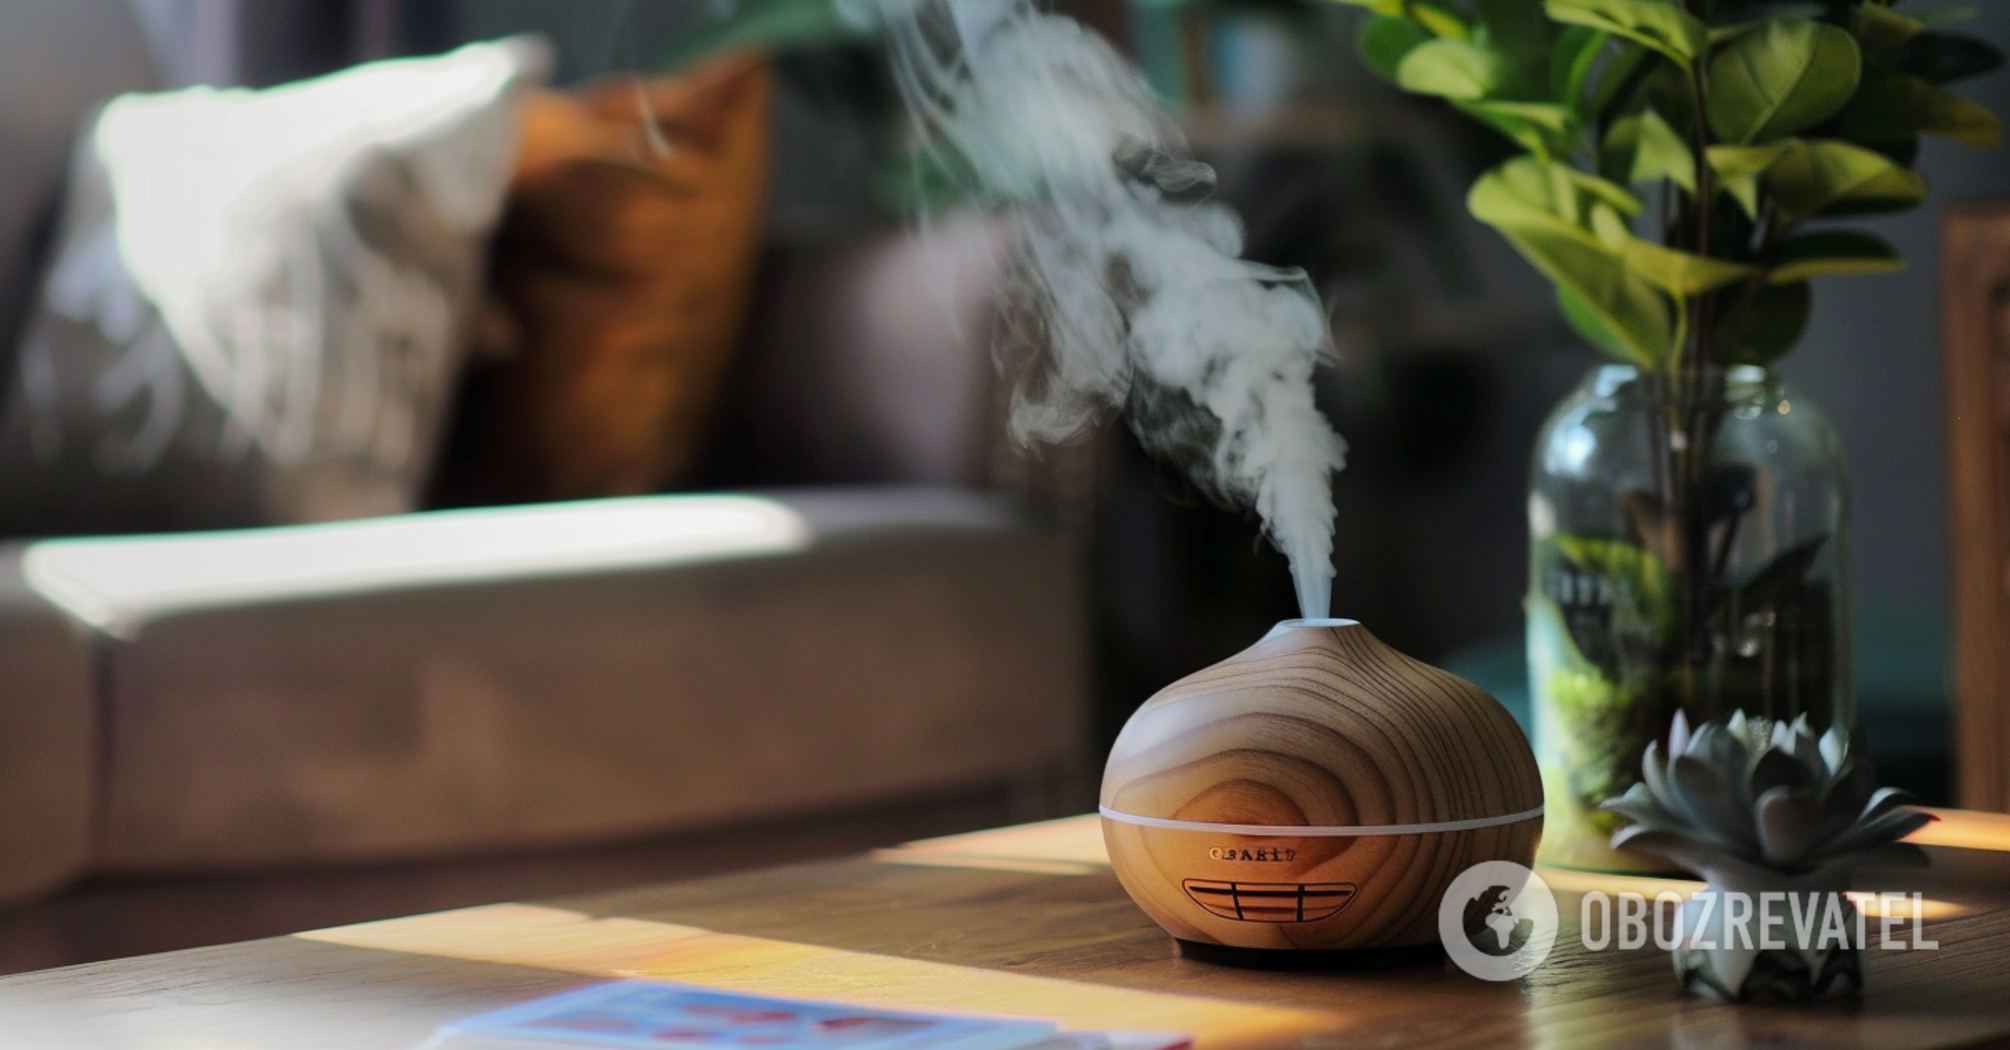 It will smell perfect: expert reveals how to fill the house with a pleasant aroma